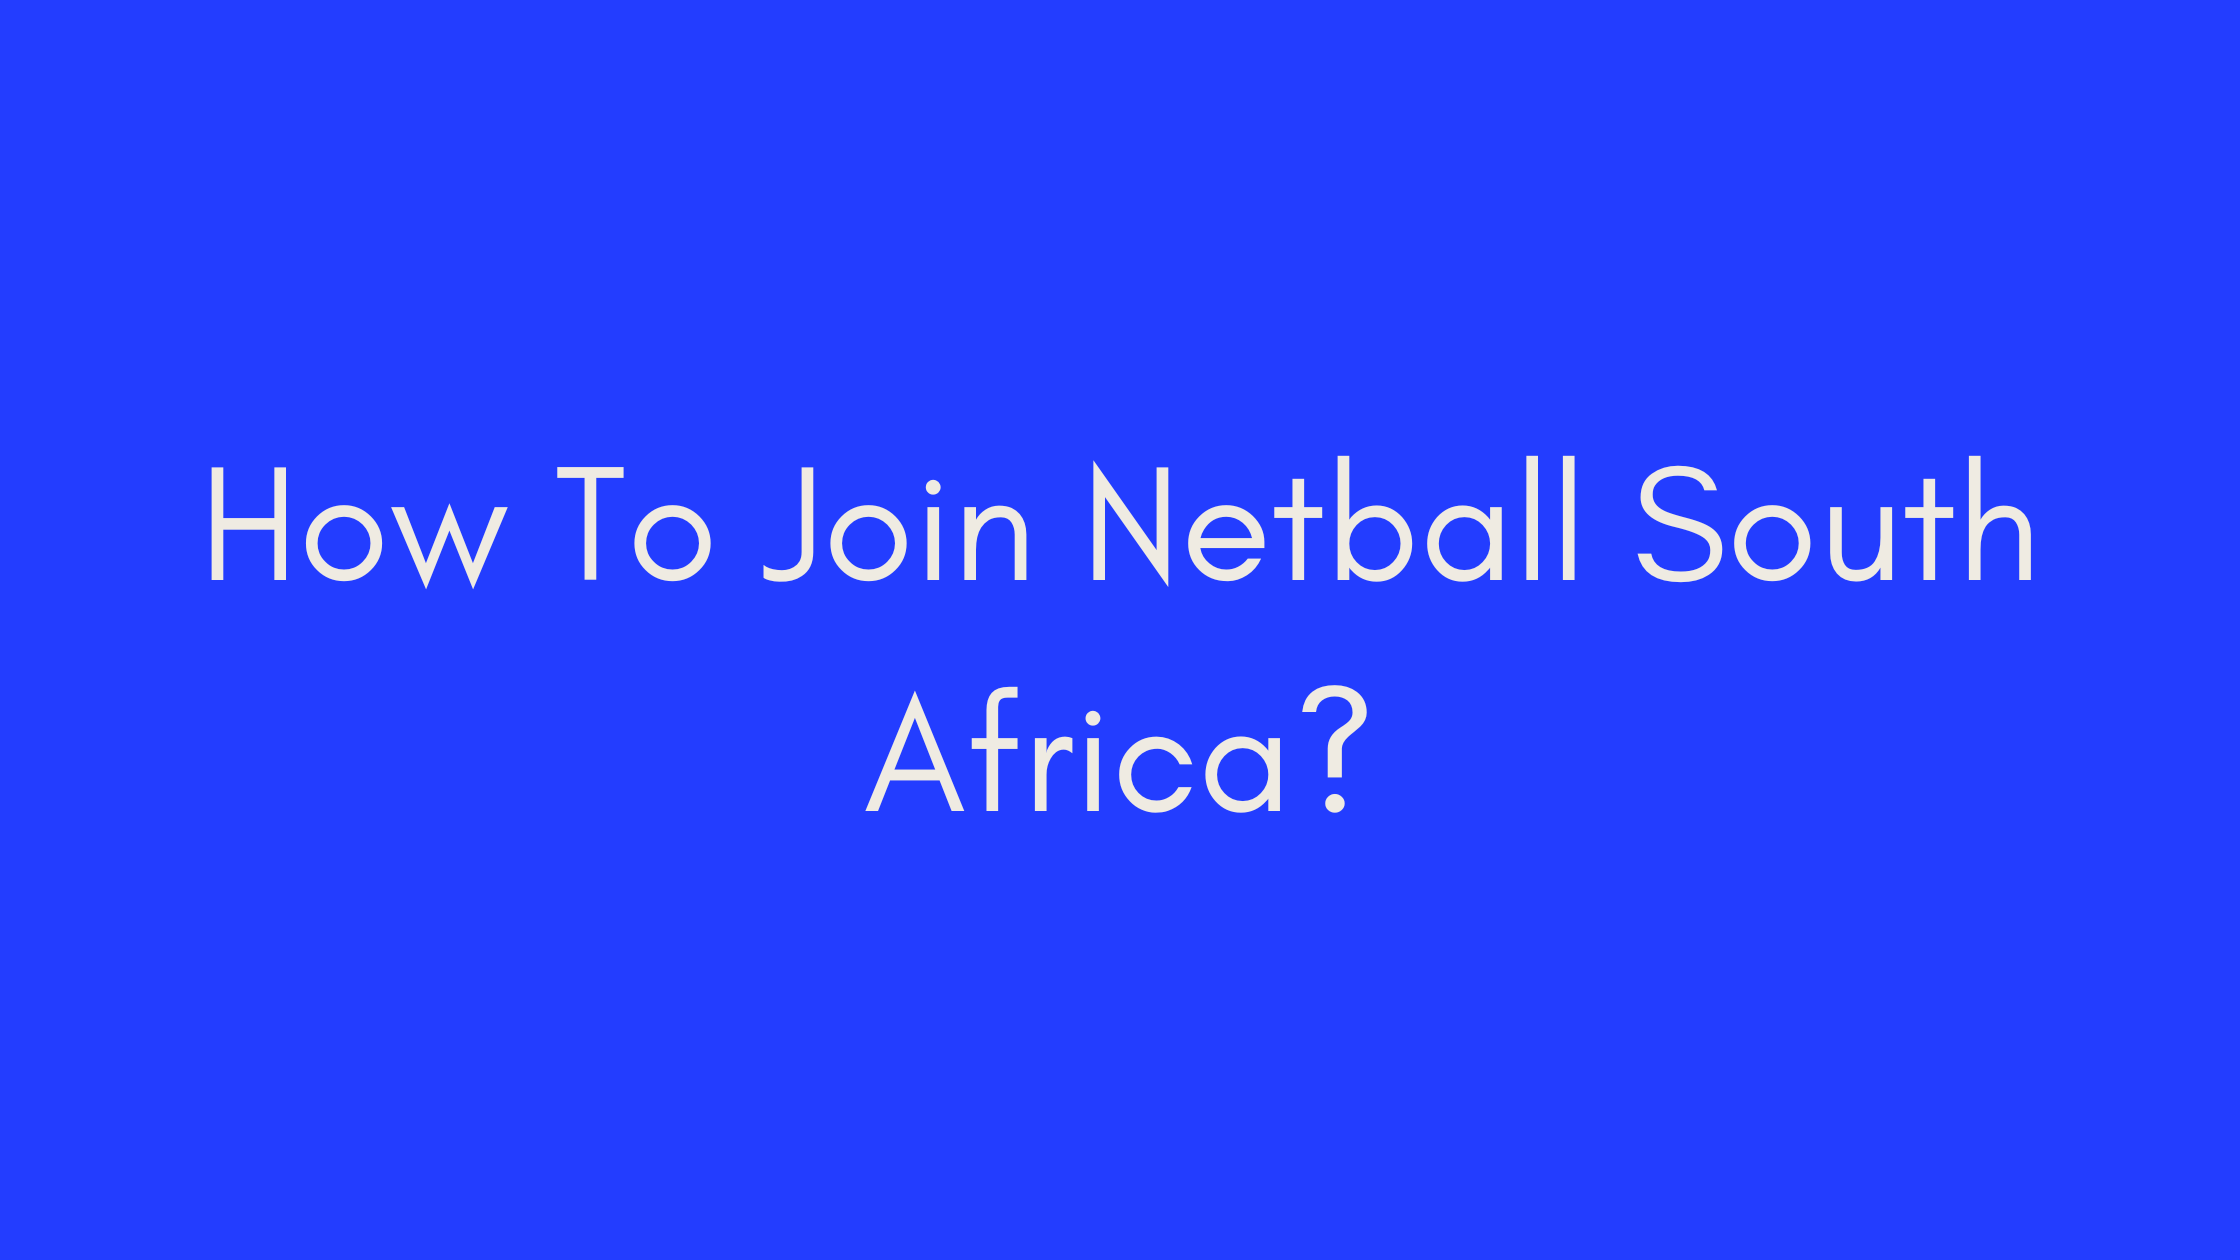 How To Join Netball South Africa How To Join Netball South Africa